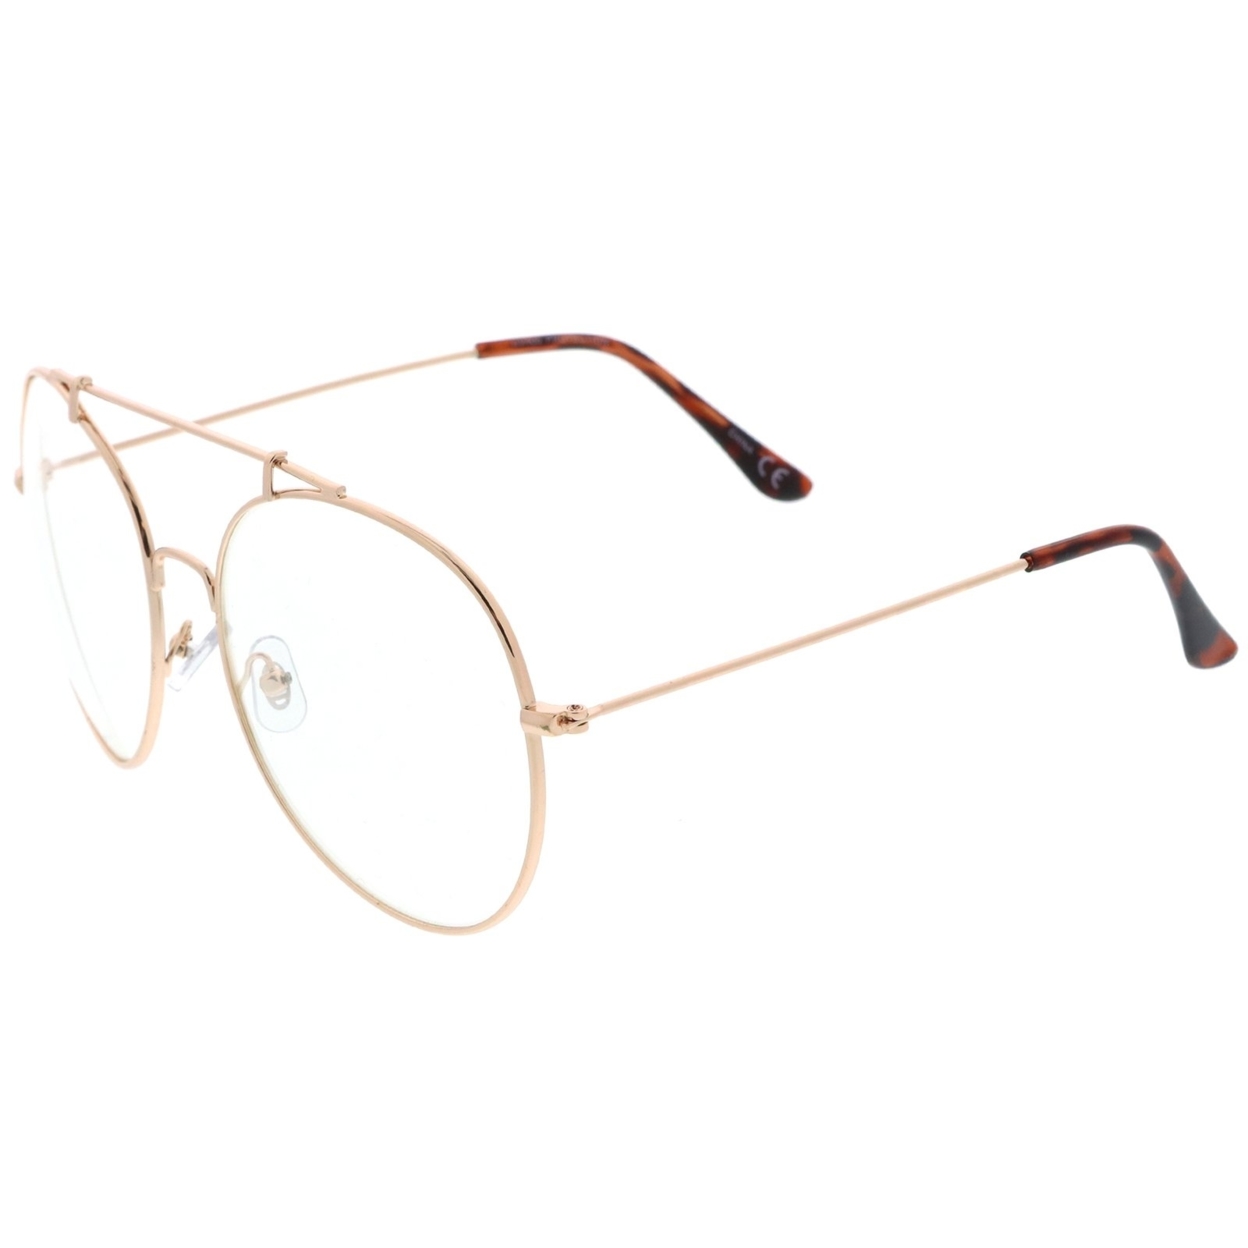 Classic Oversize Metal Frame Slim Temple Crossbar Clear Lens Round Eyeglasses 59mm - Gold / Clear